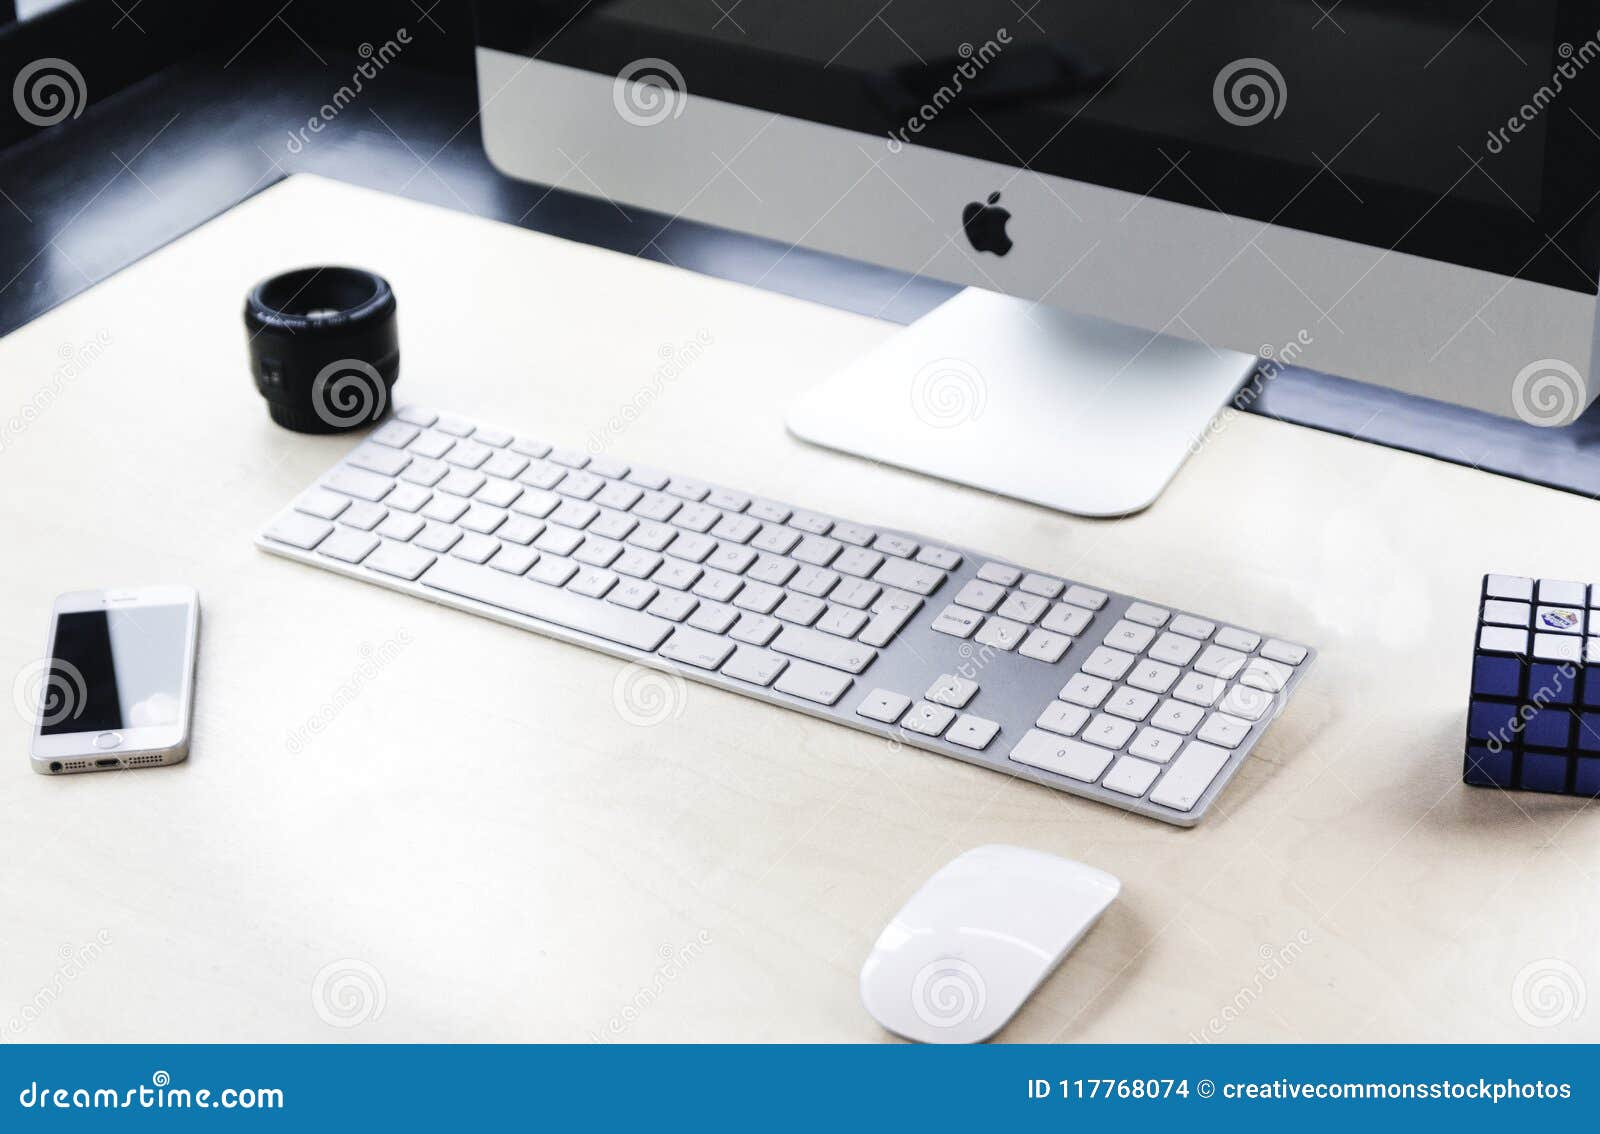 Imac Beside Apple Wireless Keyboard And Magic Mouse Picture Image